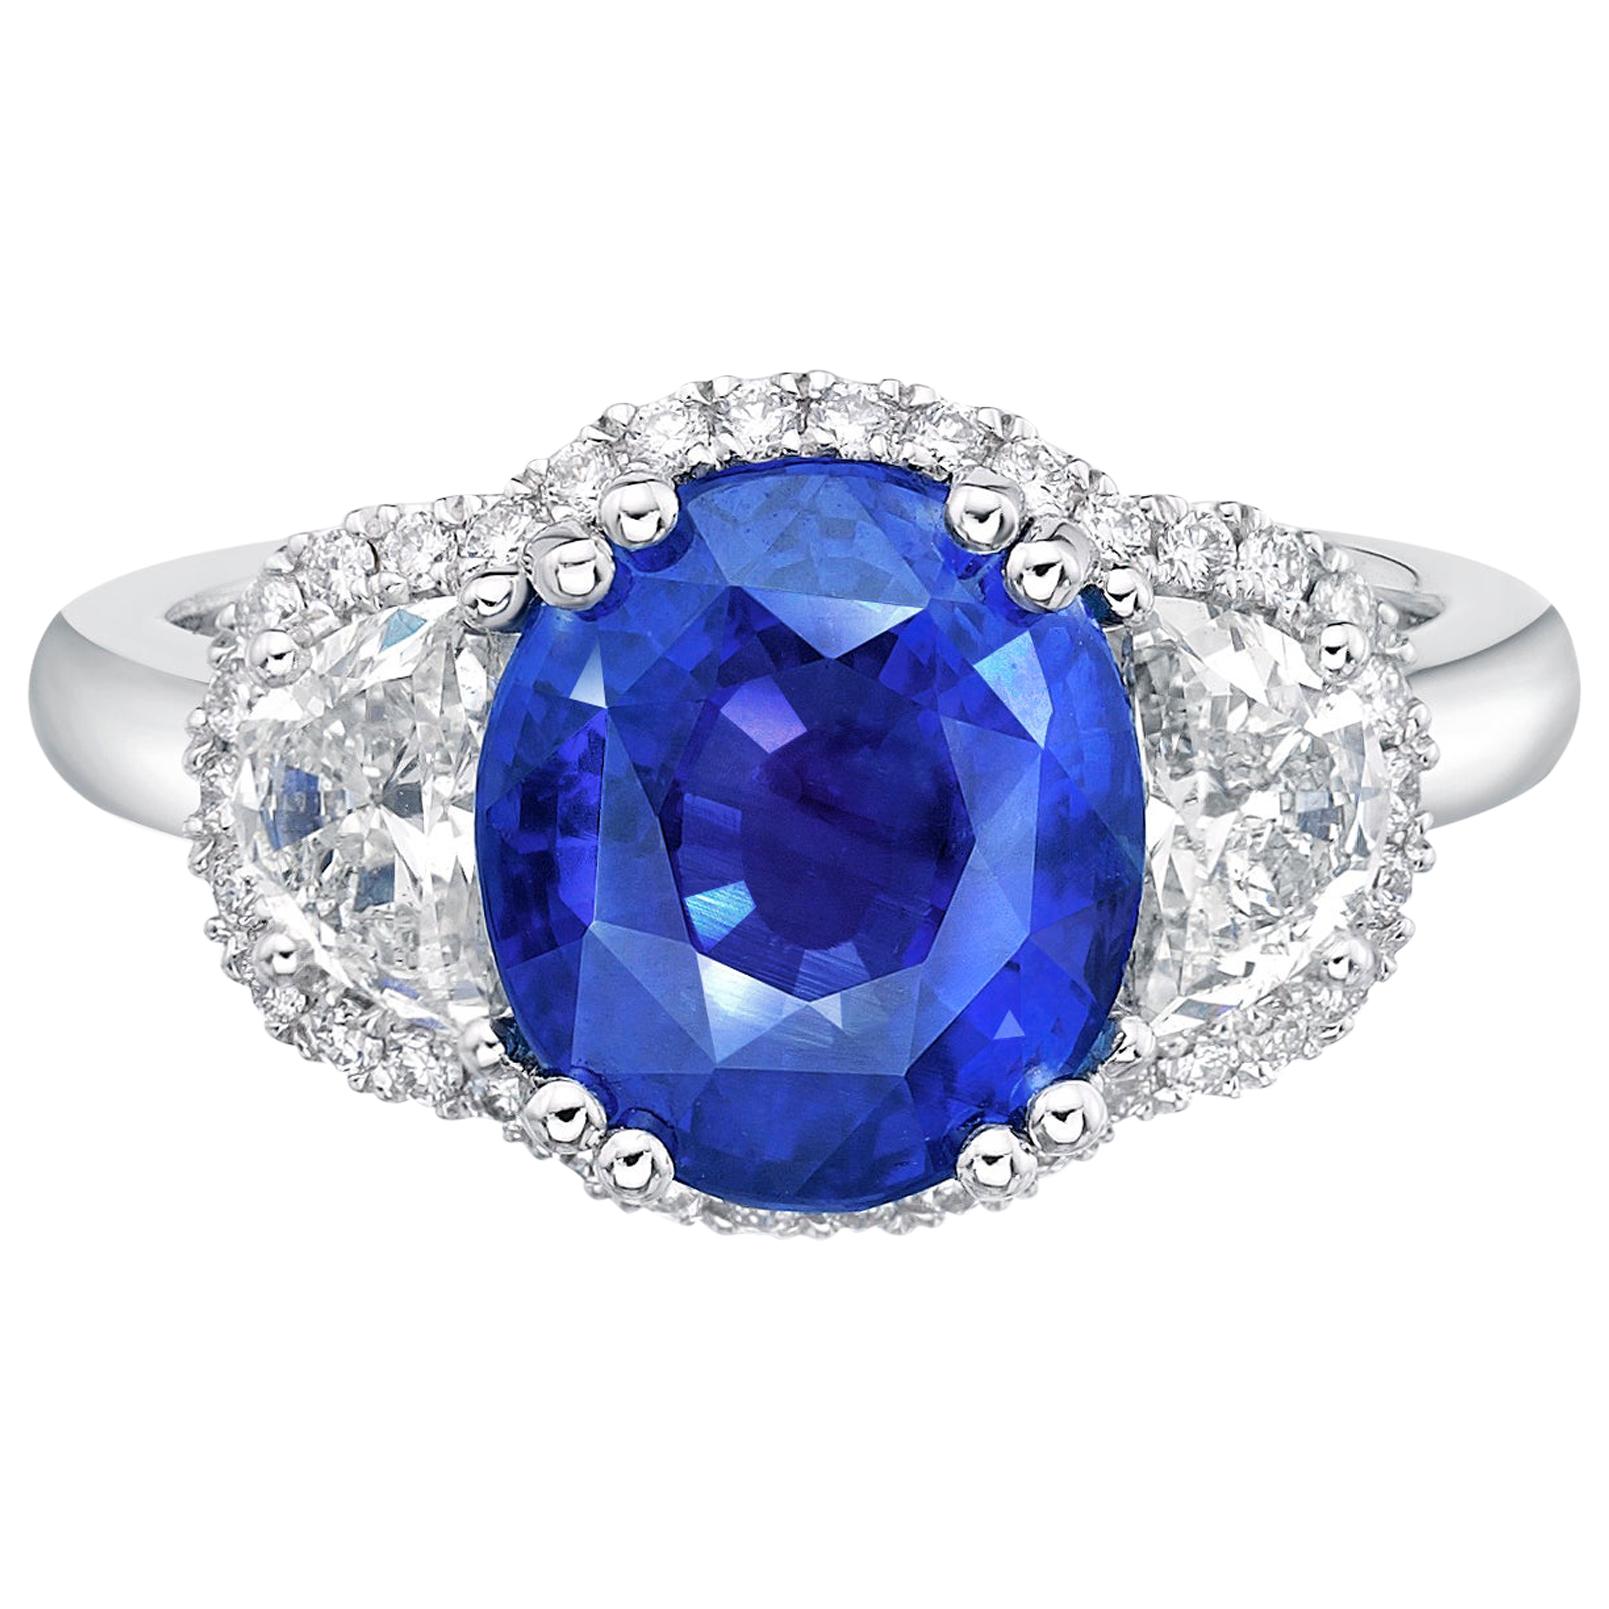 4.55 ct Unheated Vivid Royal Blue Sapphire Oval GRS Certified Ceylon Ring For Sale